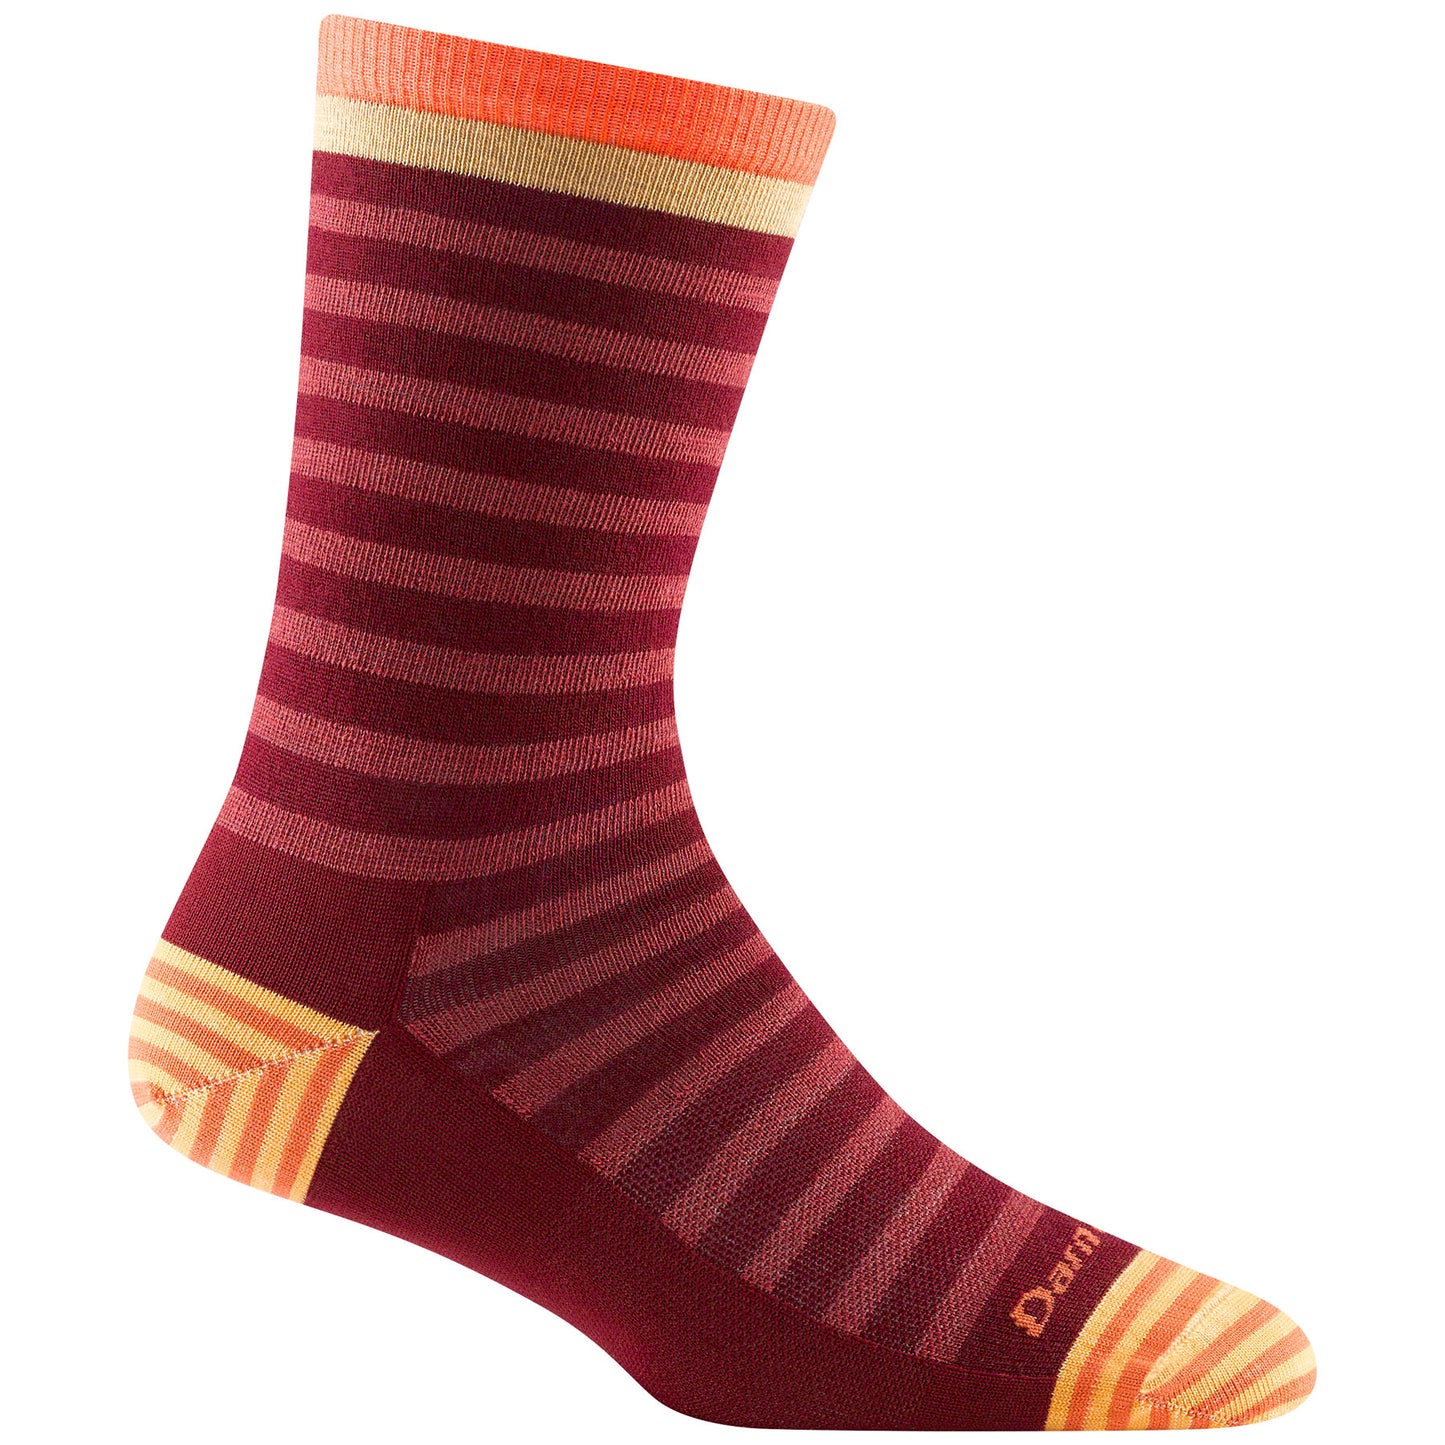 Darn Tough 6039 Burgundy striped sock, with yellow and orange stripes on heel and toe